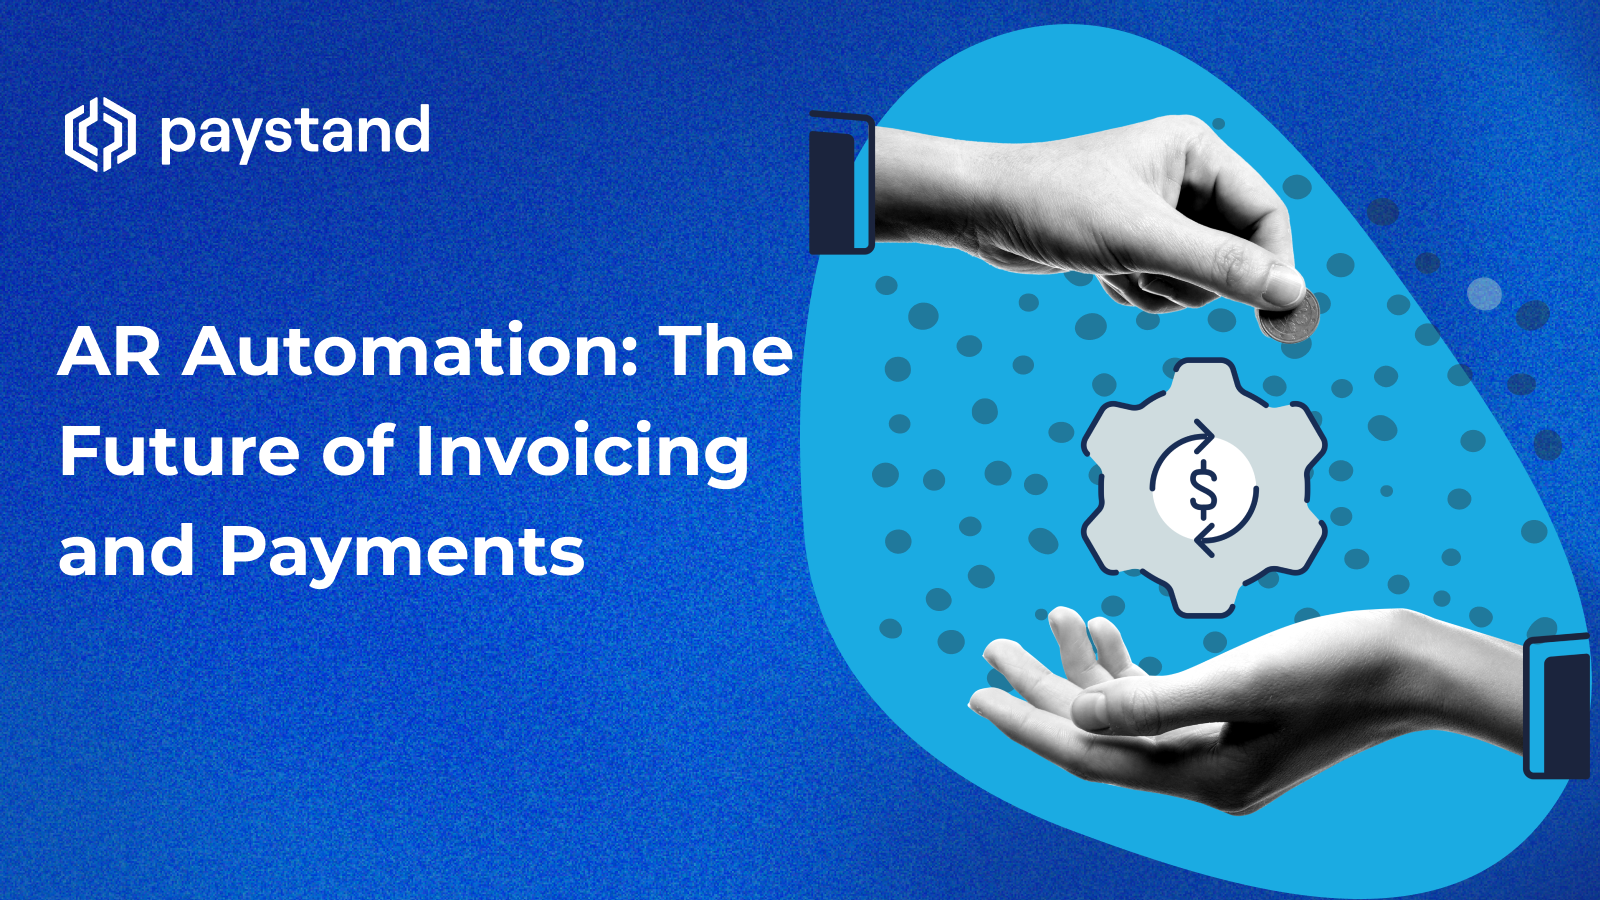 AR Automation: The Future of Invoicing and Payments